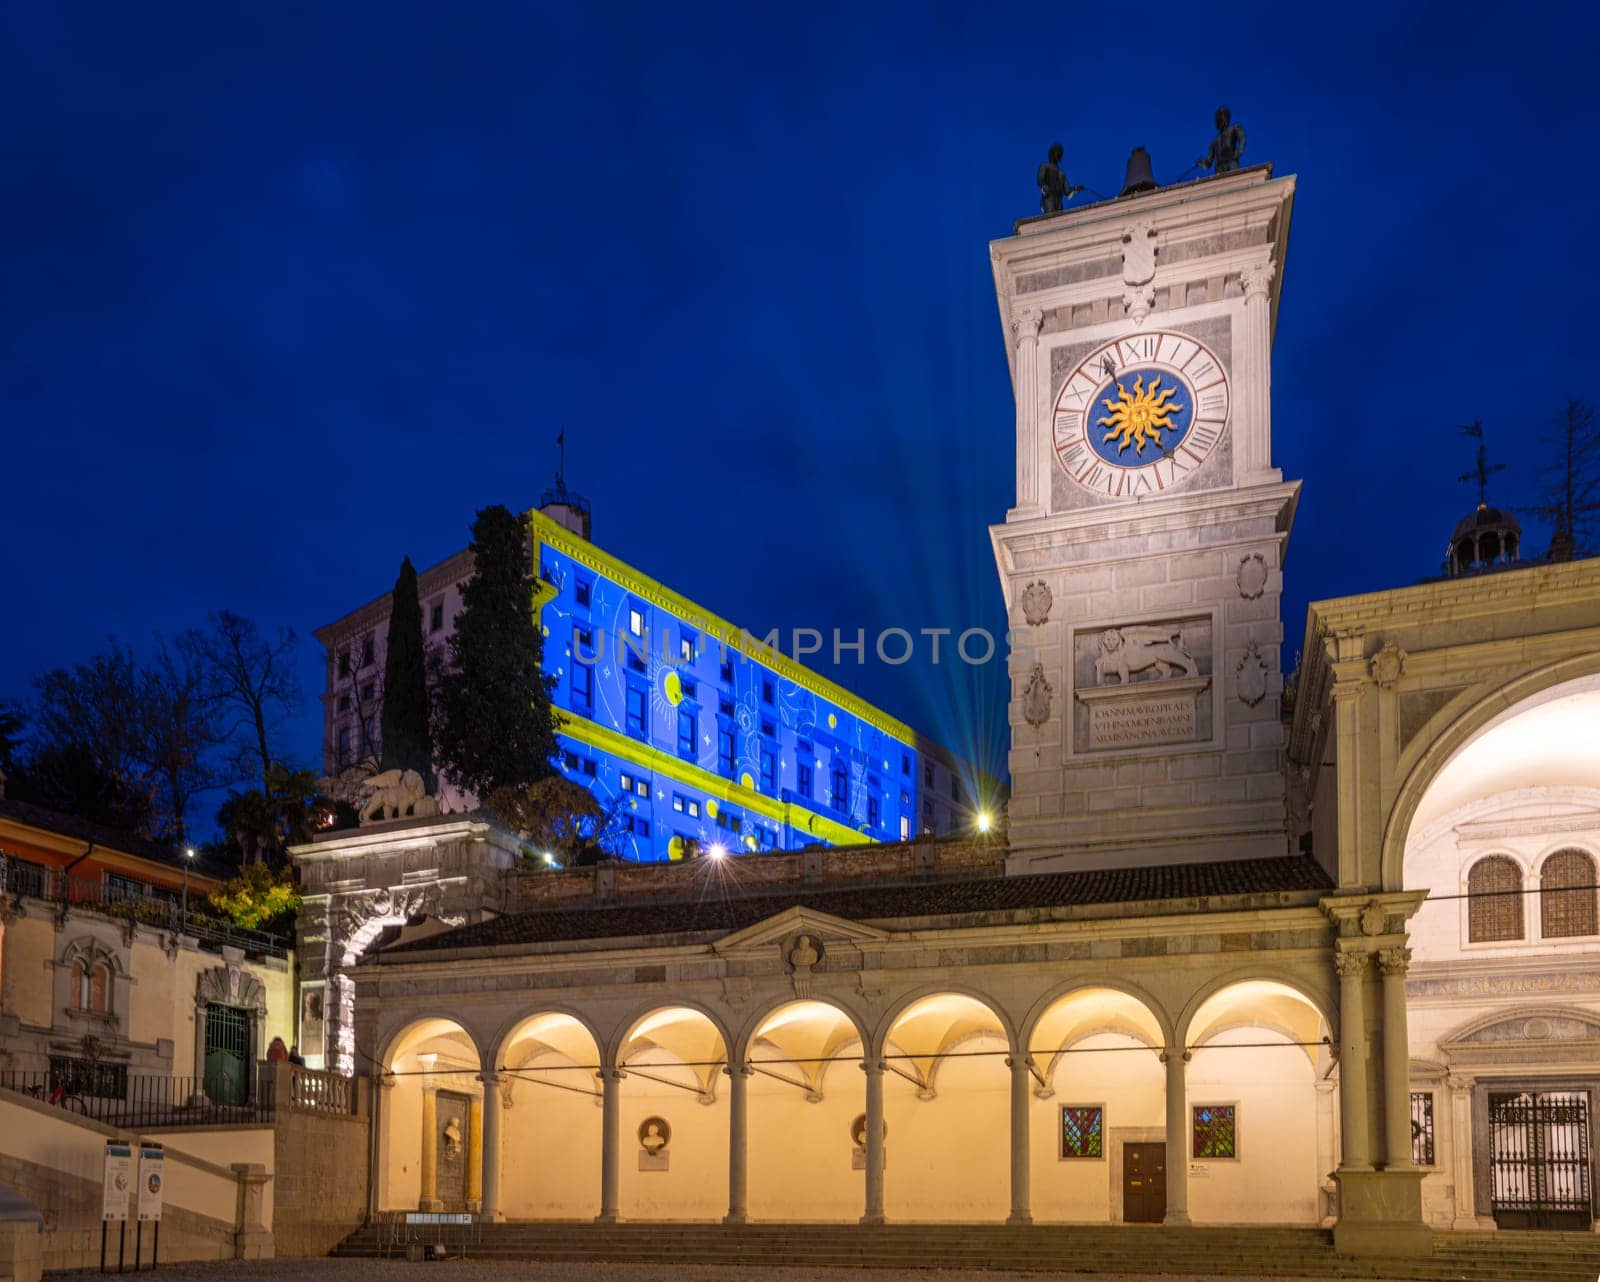 Christmas light decorations projected on the palaces in Udine, Italy by sergiodv